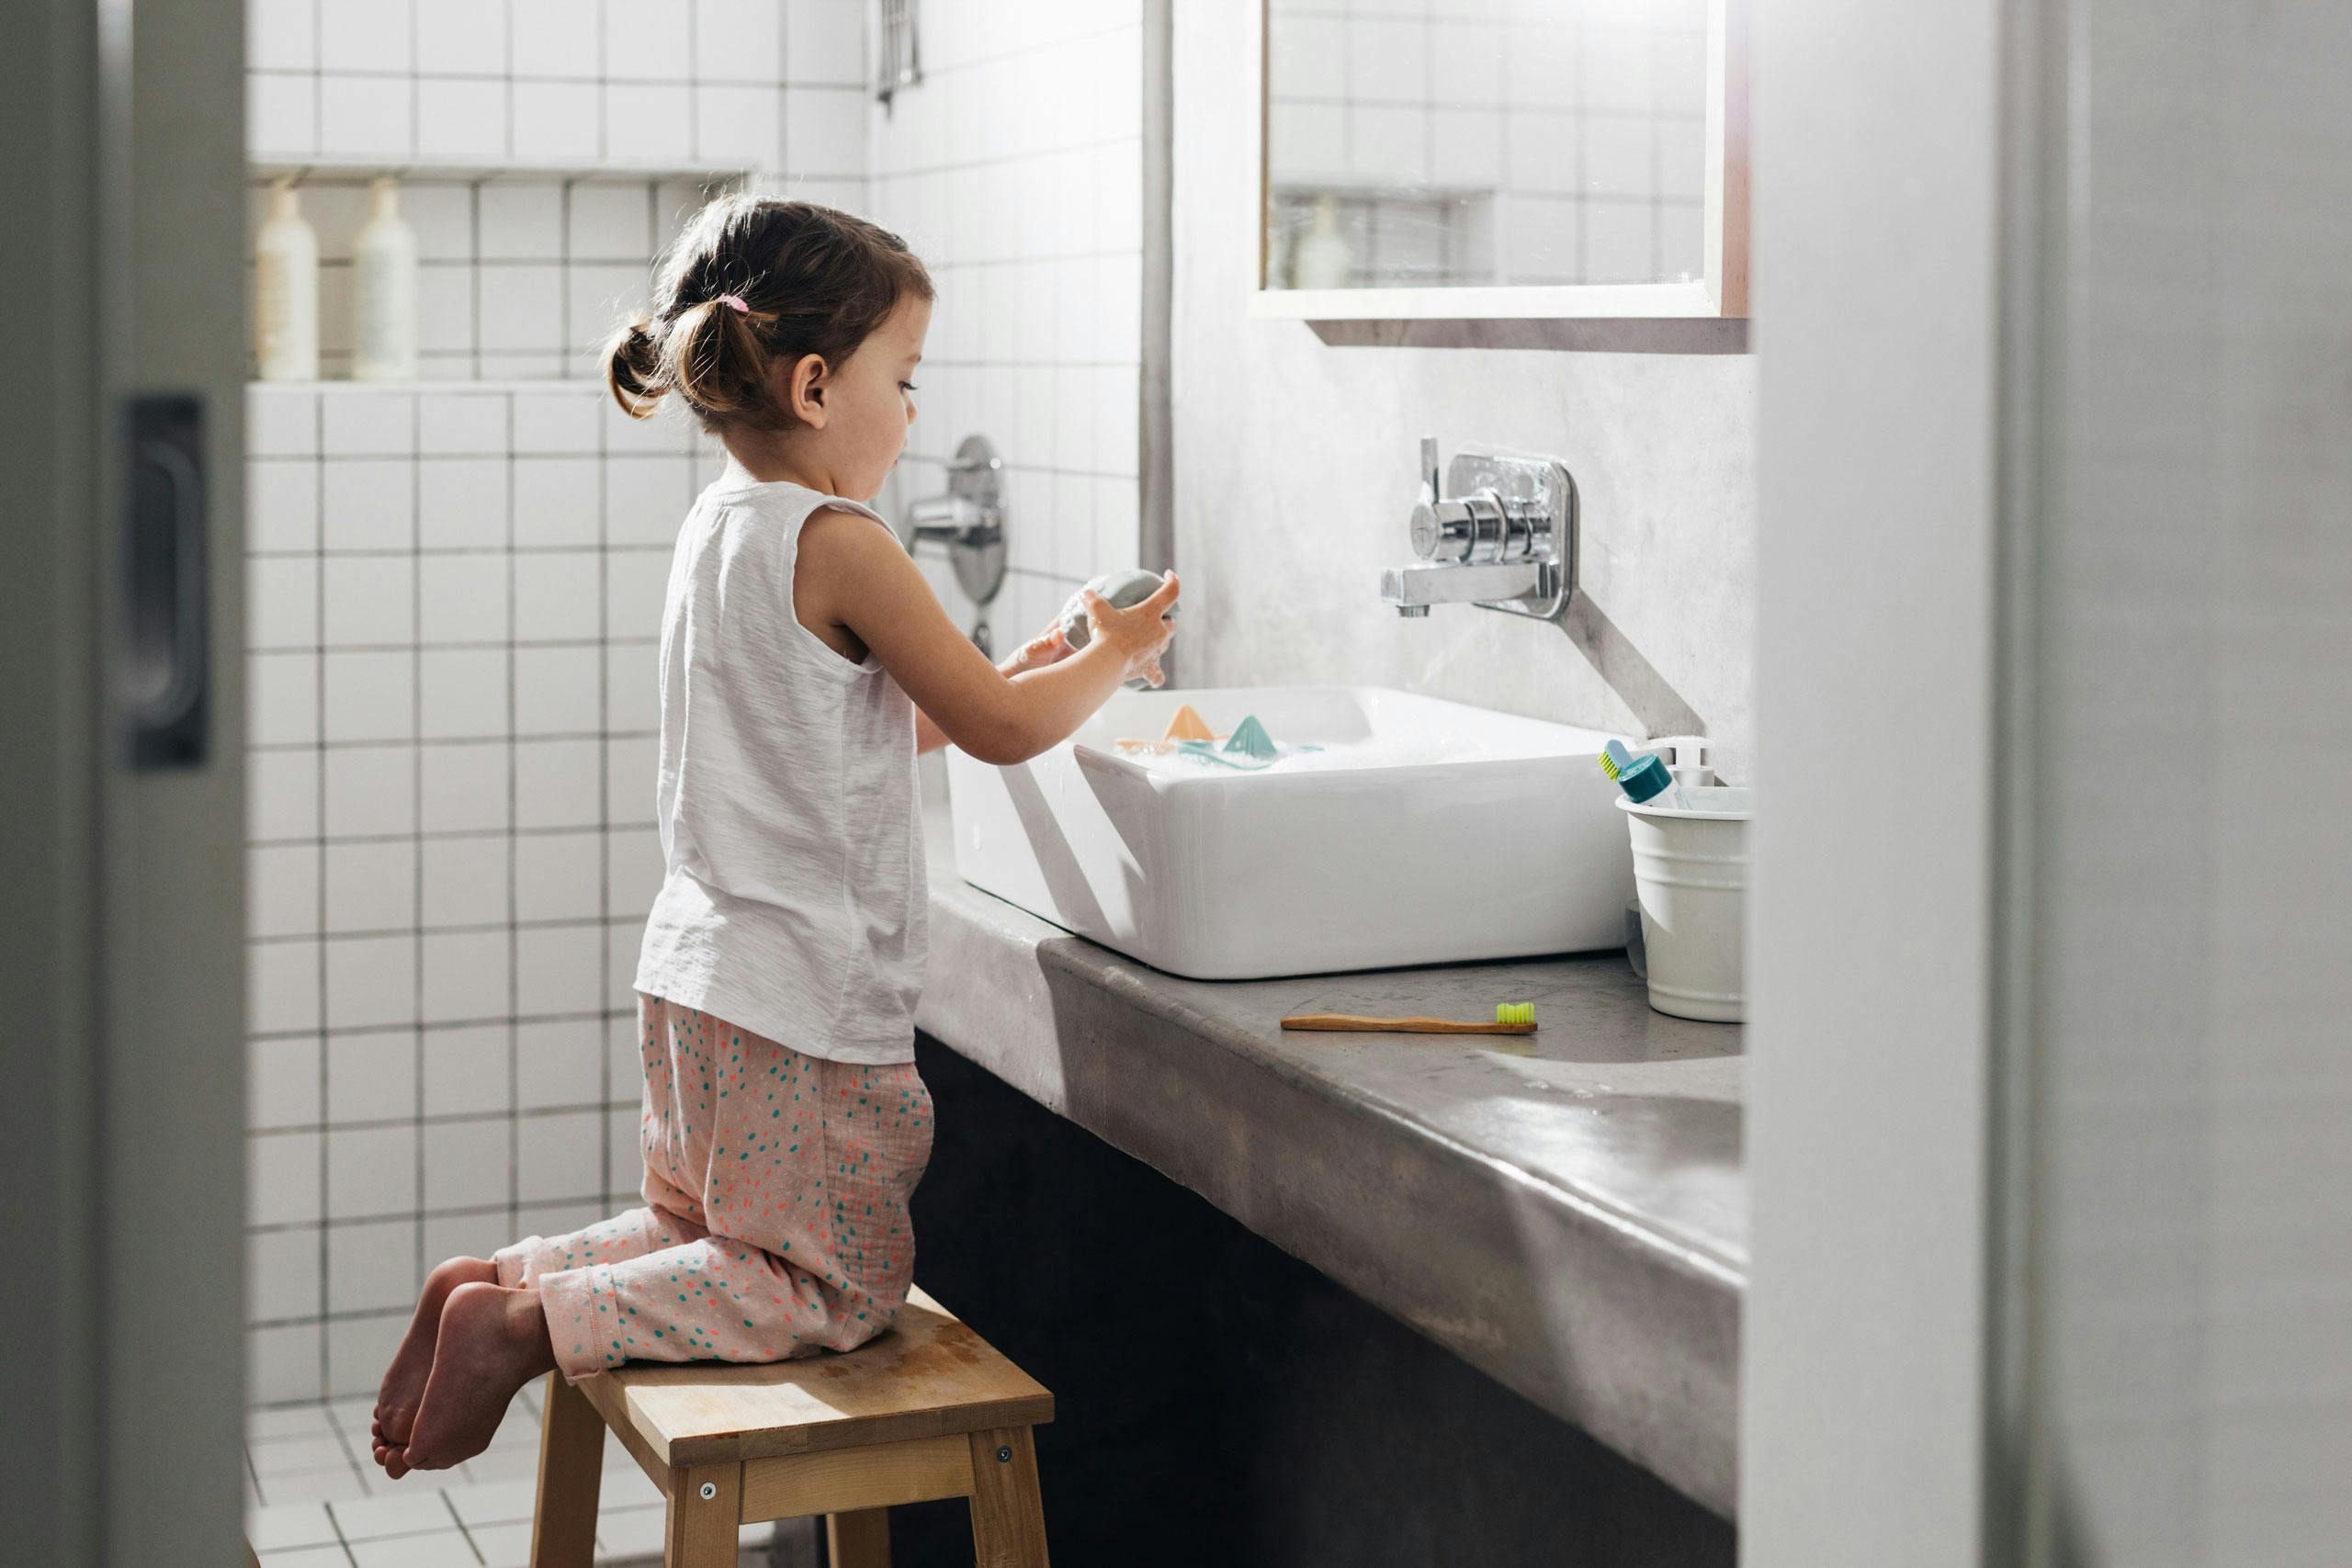 Young girl kneeling on a stool while washing her hands in the sink